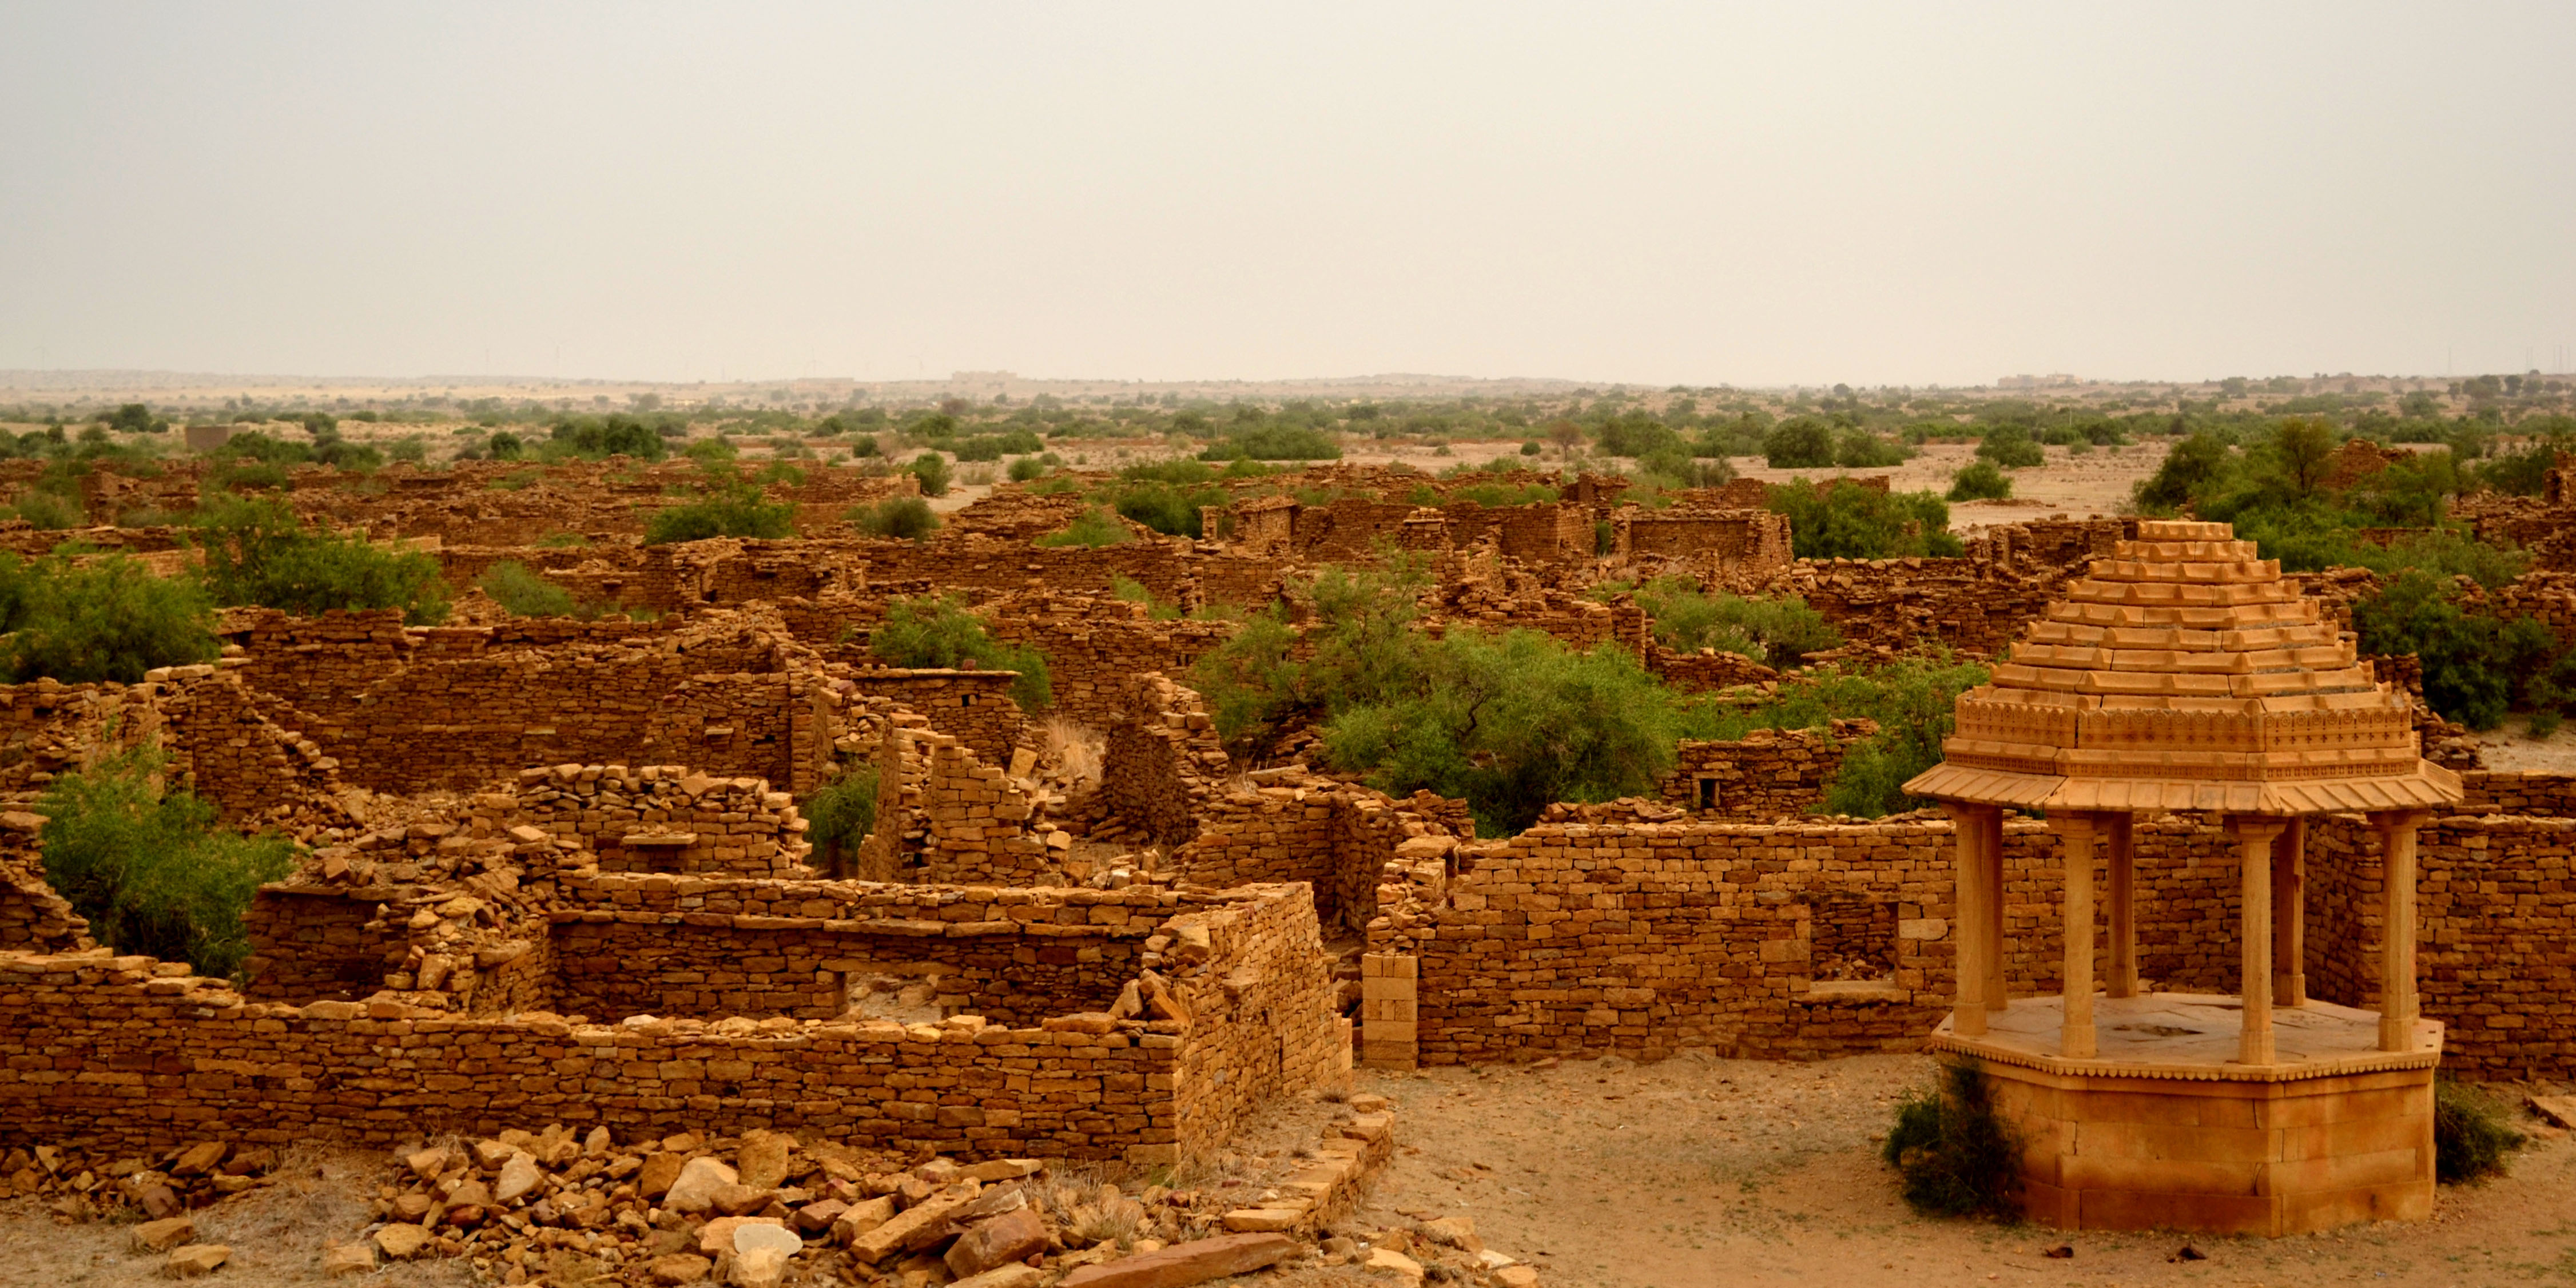 The village has been frozen in time after the 'monster of Jaisalmer' drove away the locals